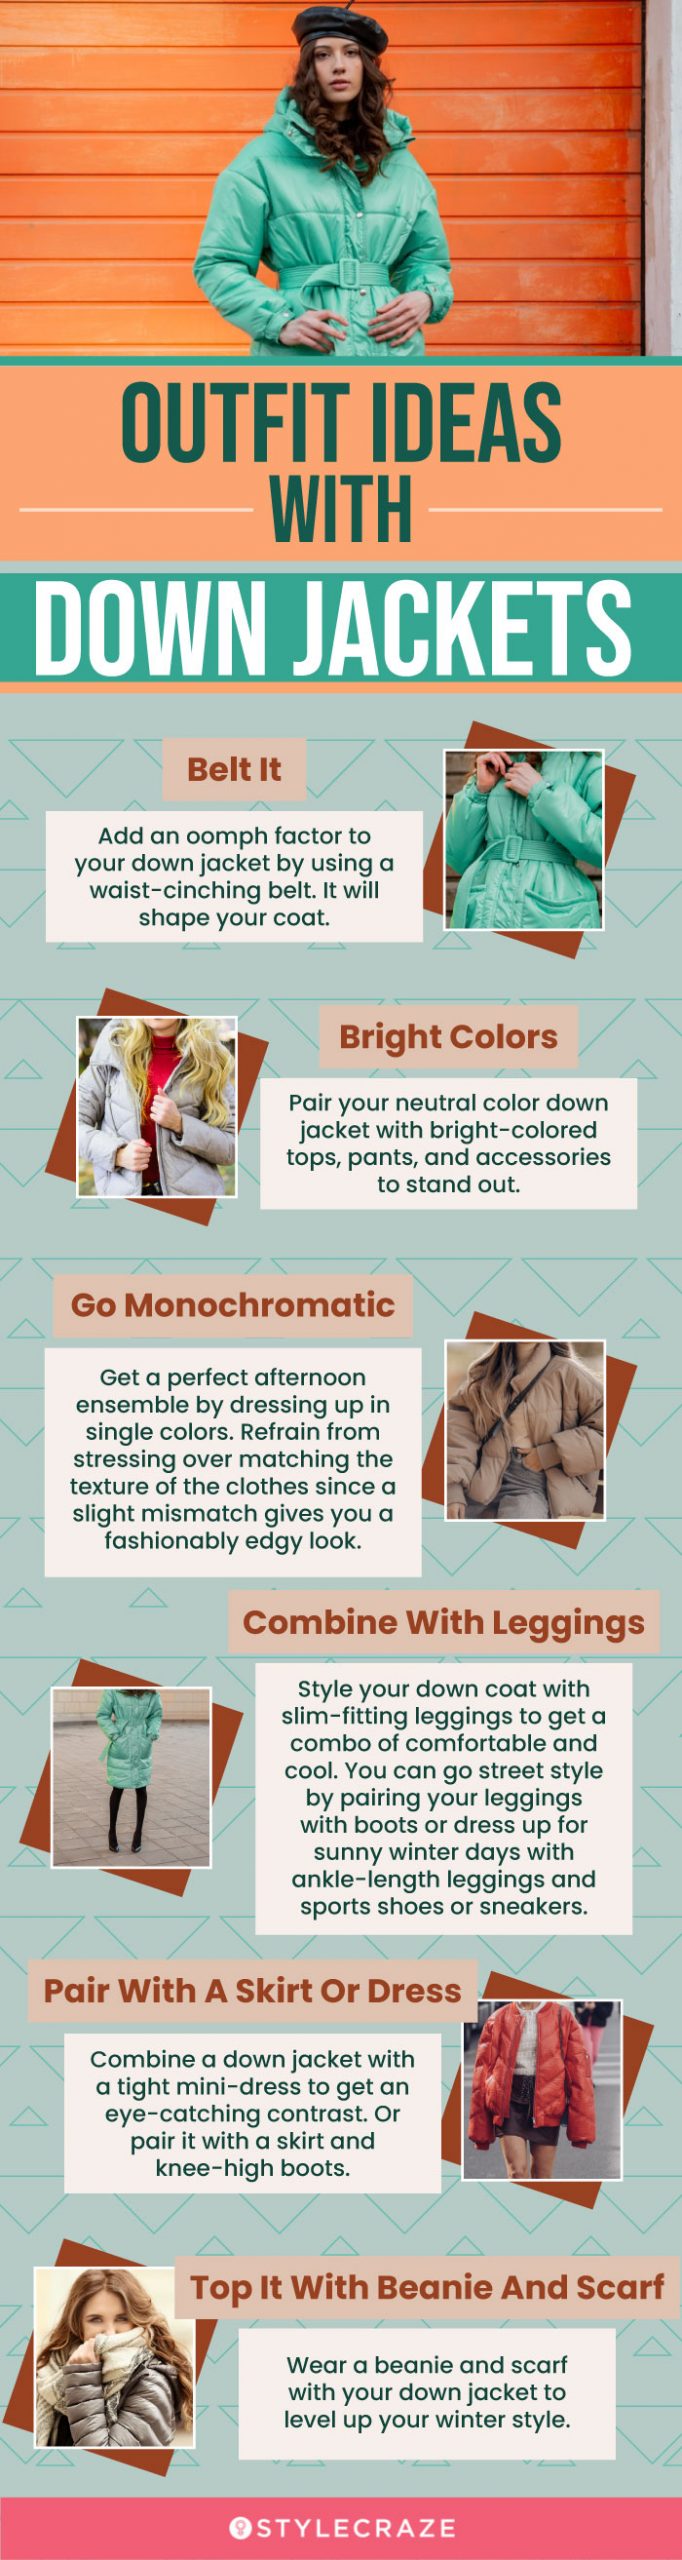 Outfit Ideas With Down Jackets (infographic)